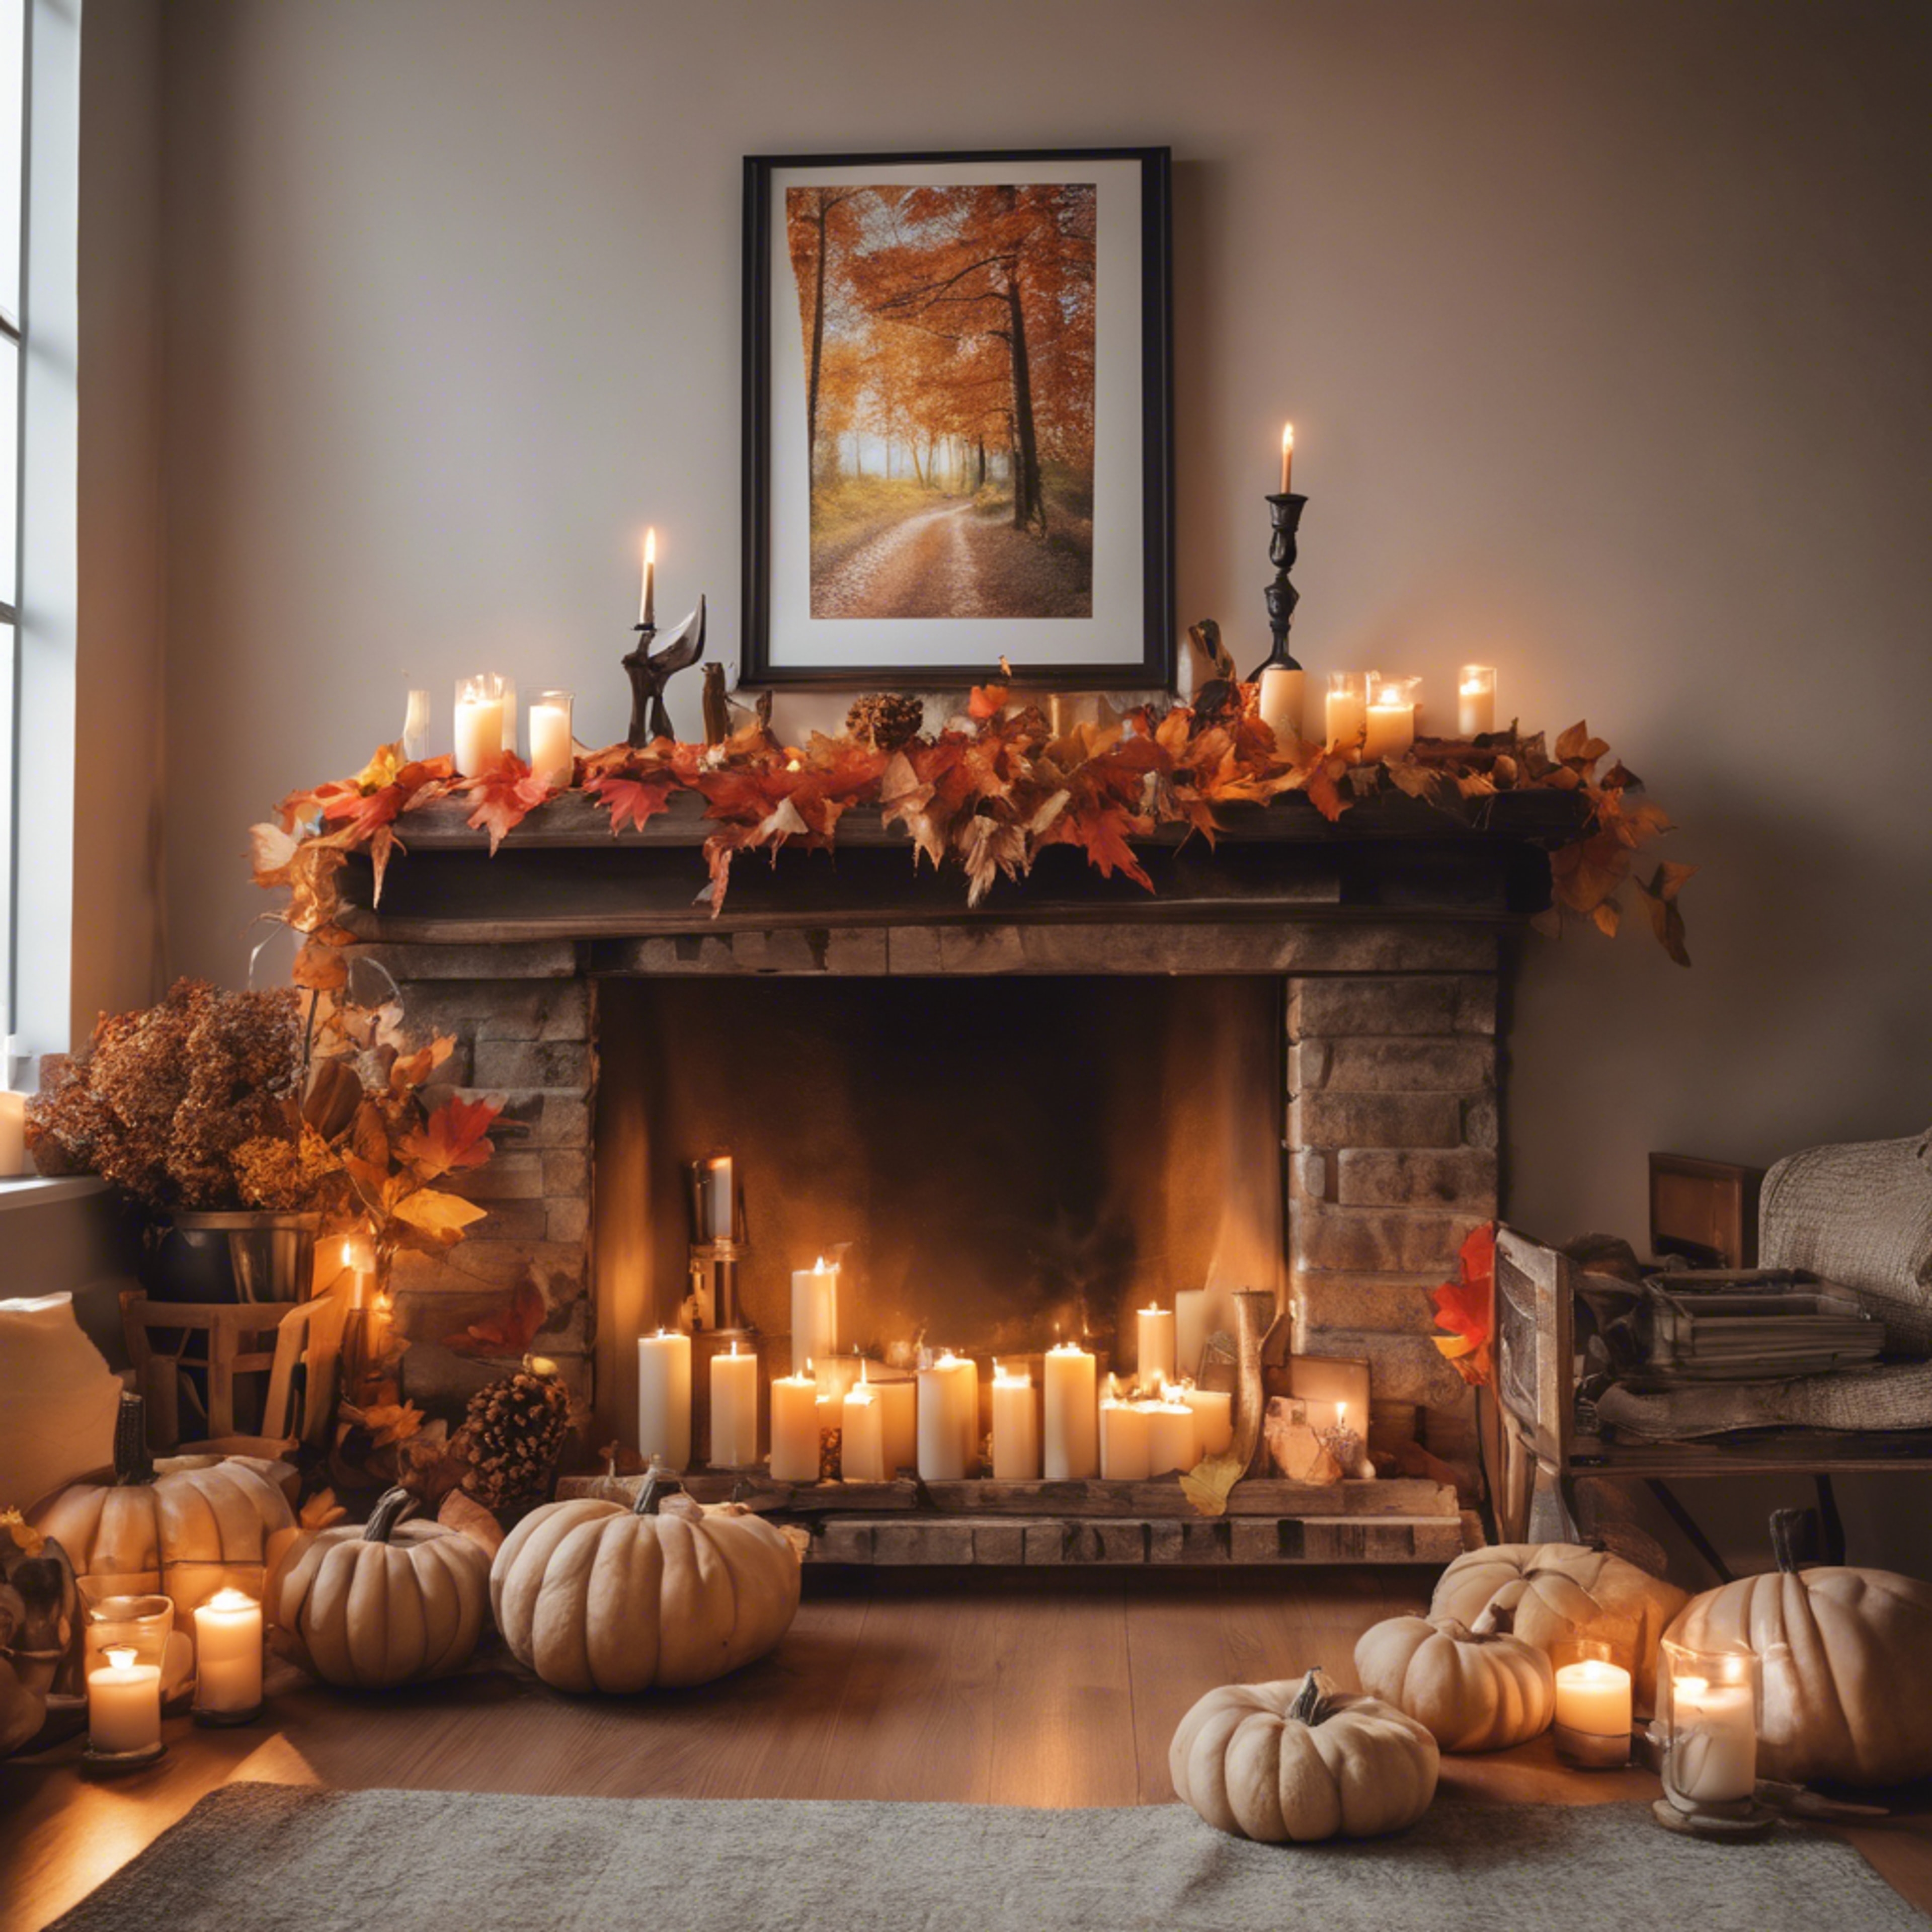 A rustic fireplace mantel tastefully decorated with candles, autumn leaves, and family photos for Thanksgiving.壁紙[94ed970113ad405badeb]